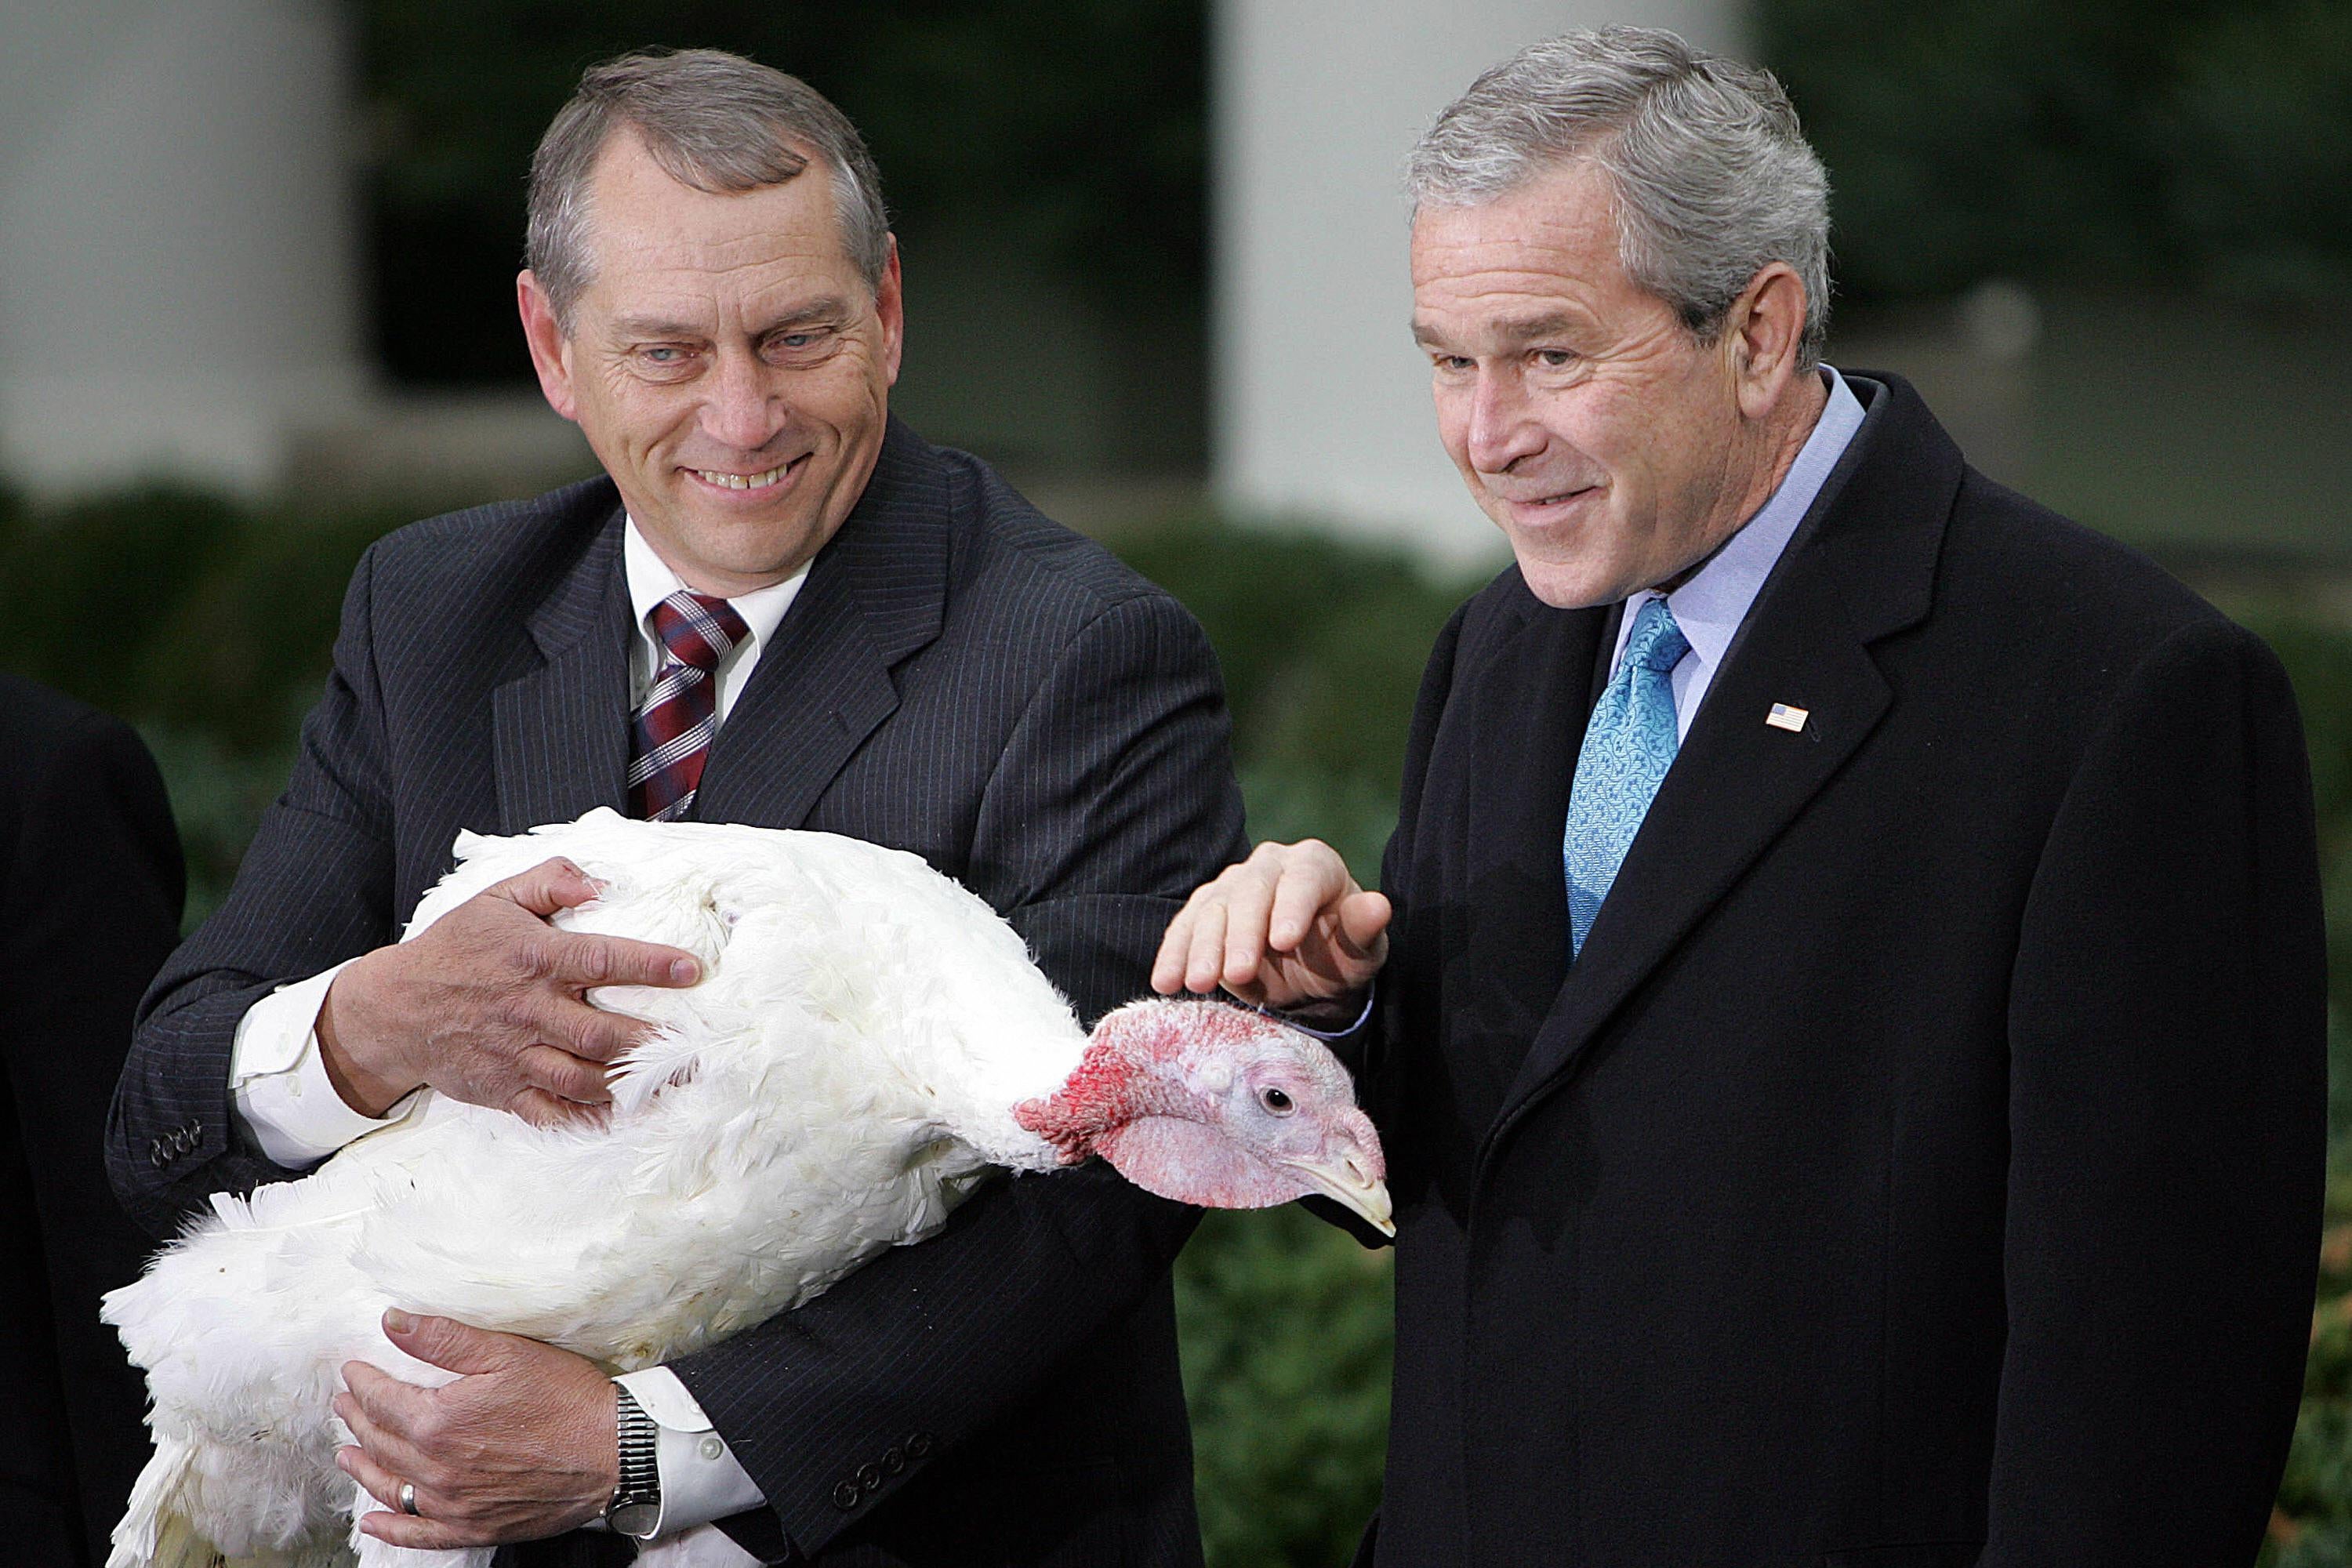 George W. Bush bows his head and gives a sheepish grin as he extends his hand to pet the head of a turkey being held by a man next to him.